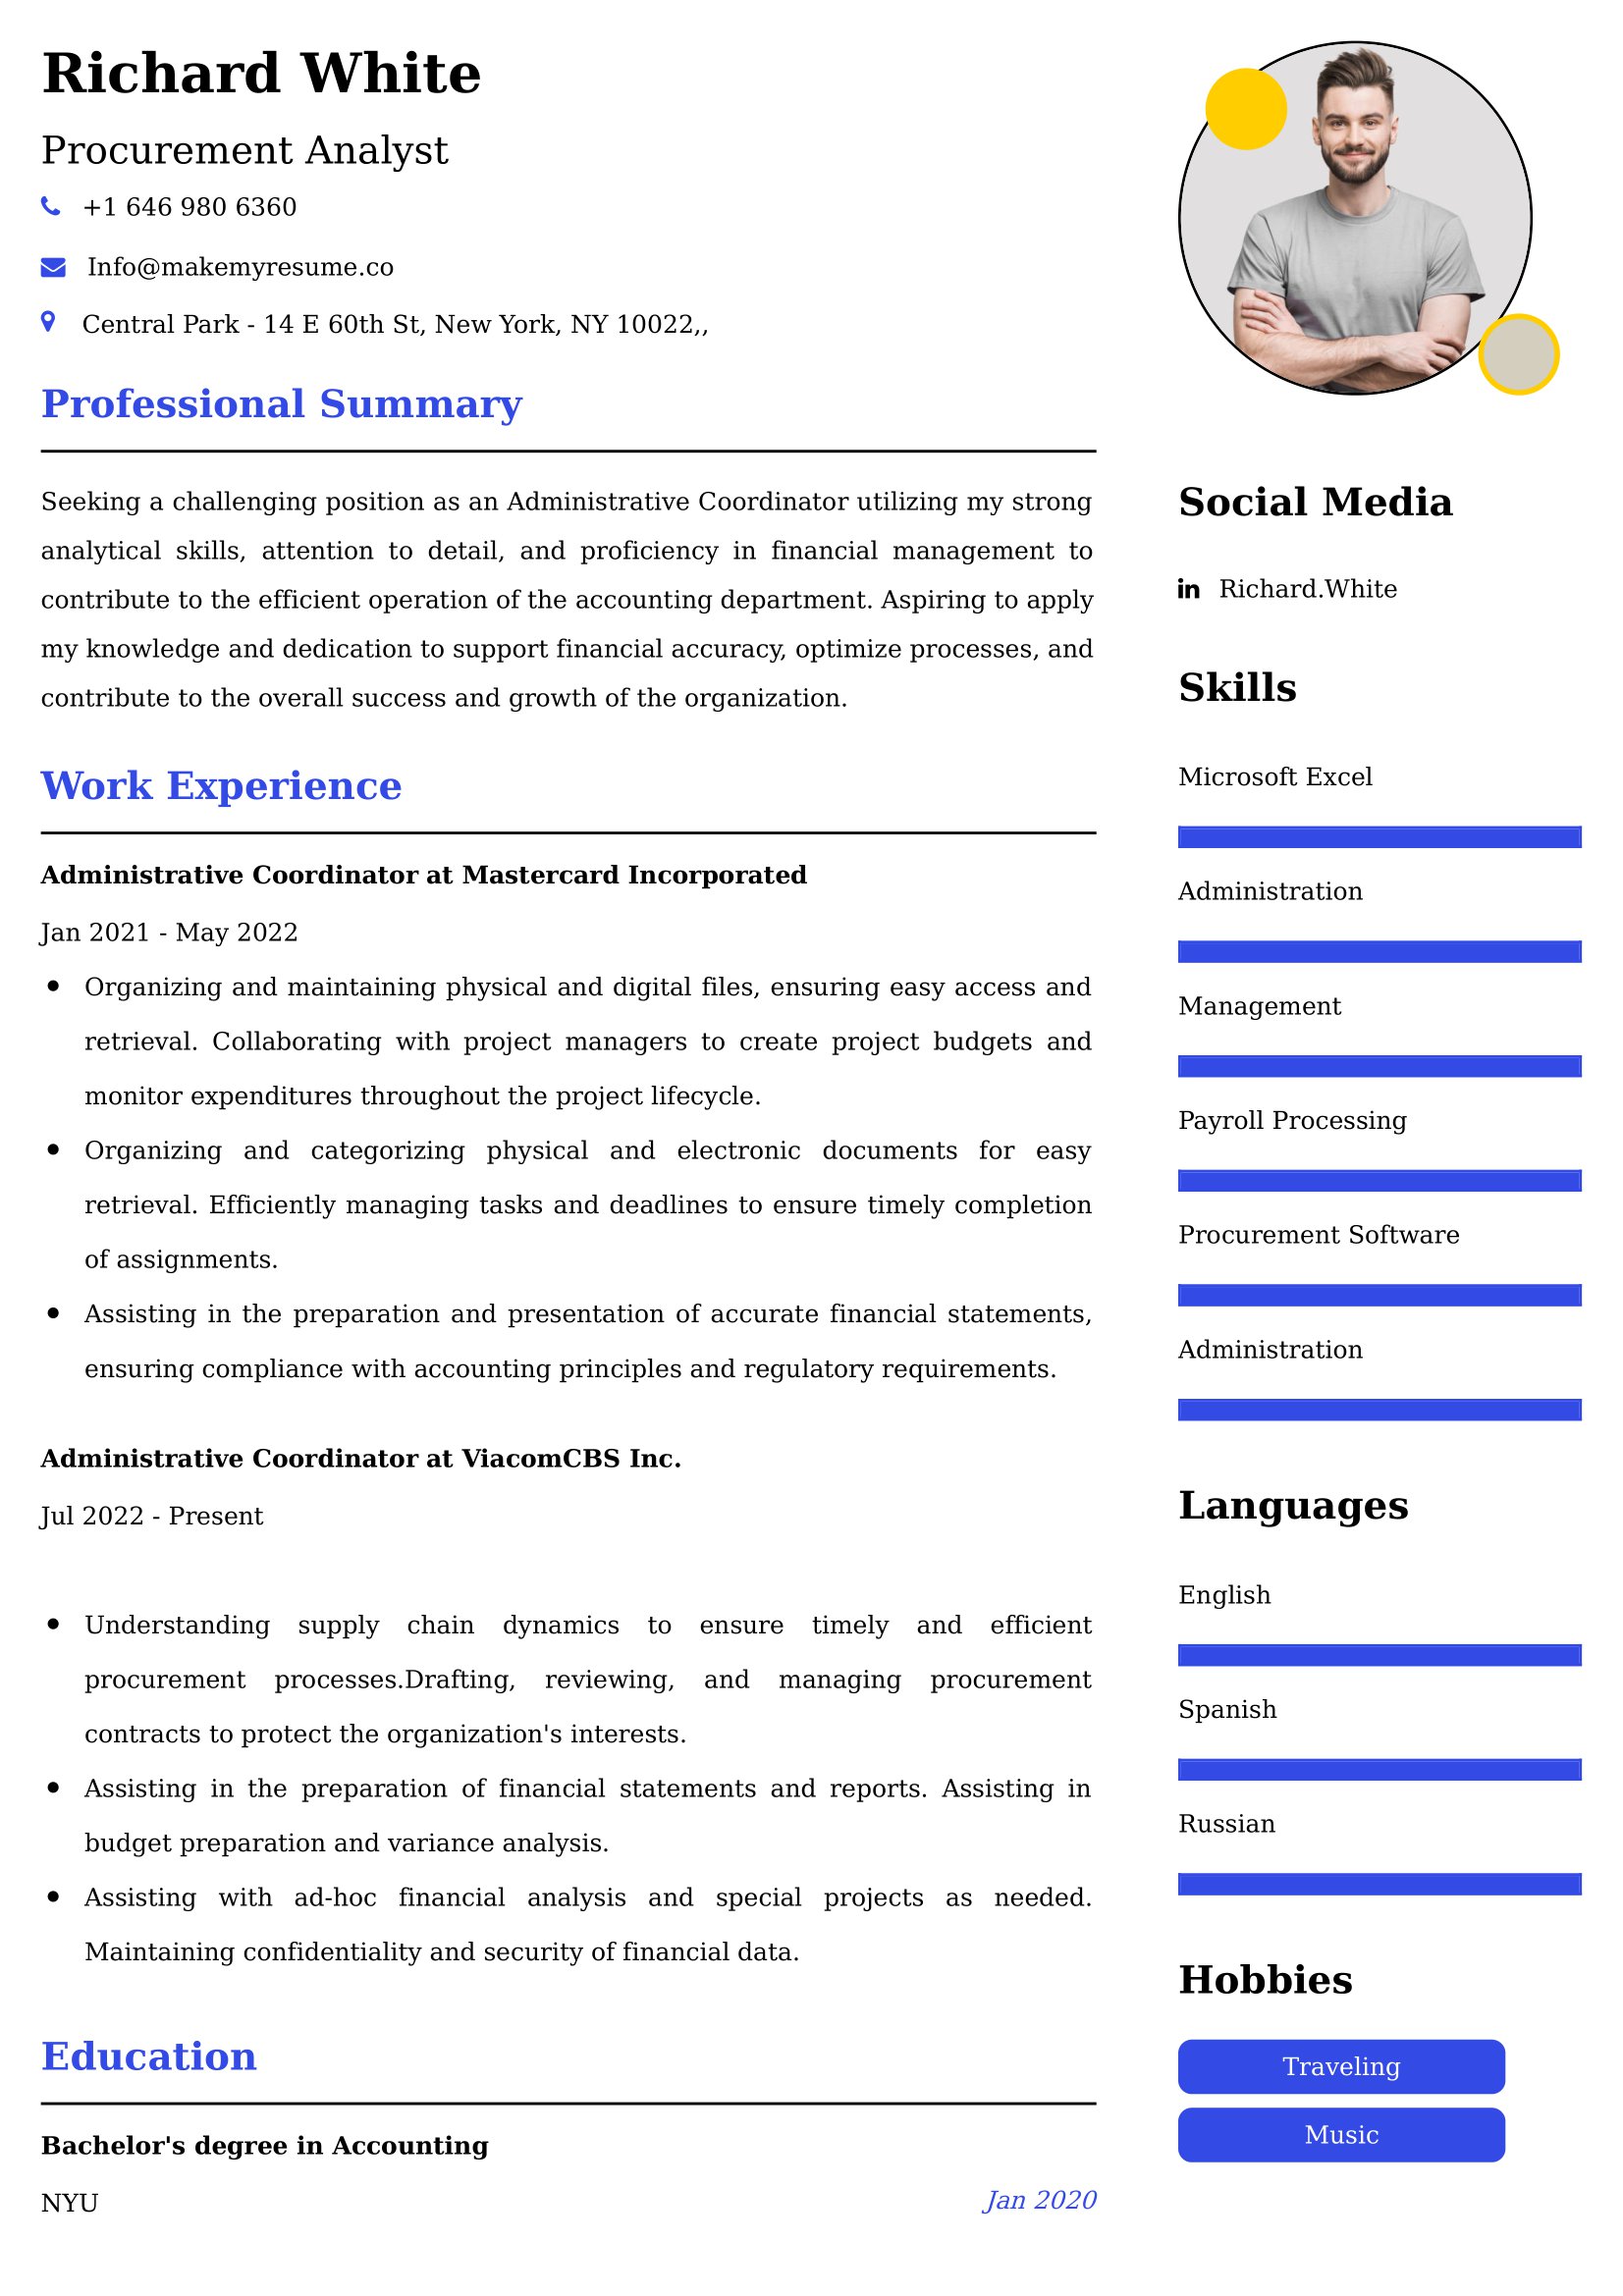 Procurement Analyst Resume Examples for UK Jobs - Tips and Guide